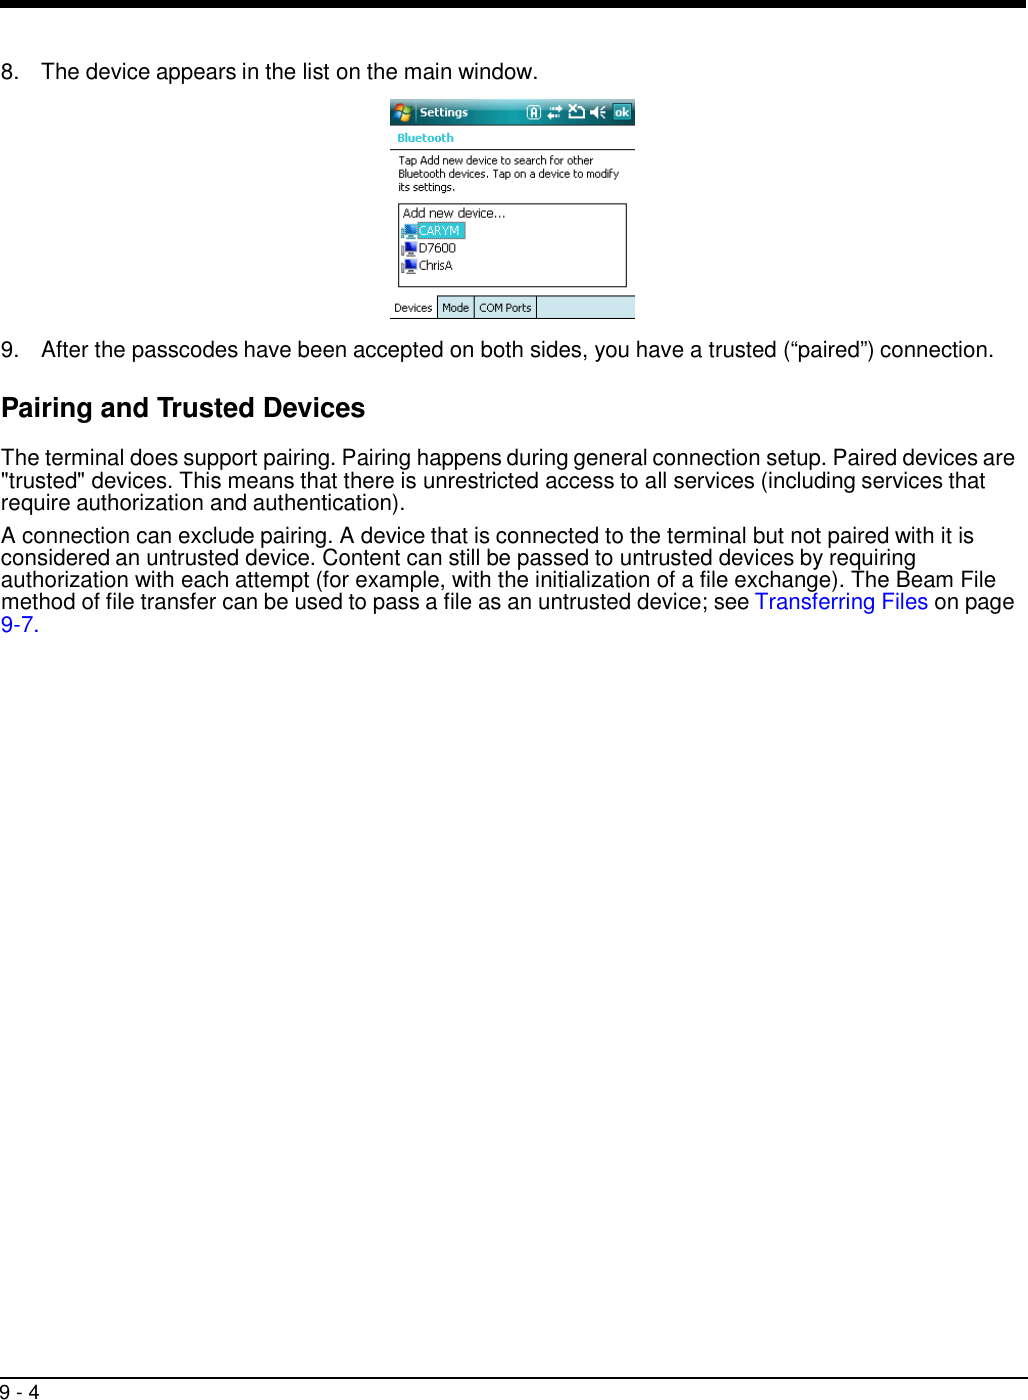 9 - 4     8.  The device appears in the list on the main window.    9.  After the passcodes have been accepted on both sides, you have a trusted (“paired”) connection.  Pairing and Trusted Devices  The terminal does support pairing. Pairing happens during general connection setup. Paired devices are &quot;trusted&quot; devices. This means that there is unrestricted access to all services (including services that require authorization and authentication).  A connection can exclude pairing. A device that is connected to the terminal but not paired with it is considered an untrusted device. Content can still be passed to untrusted devices by requiring authorization with each attempt (for example, with the initialization of a file exchange). The Beam File method of file transfer can be used to pass a file as an untrusted device; see Transferring Files on page 9-7. 